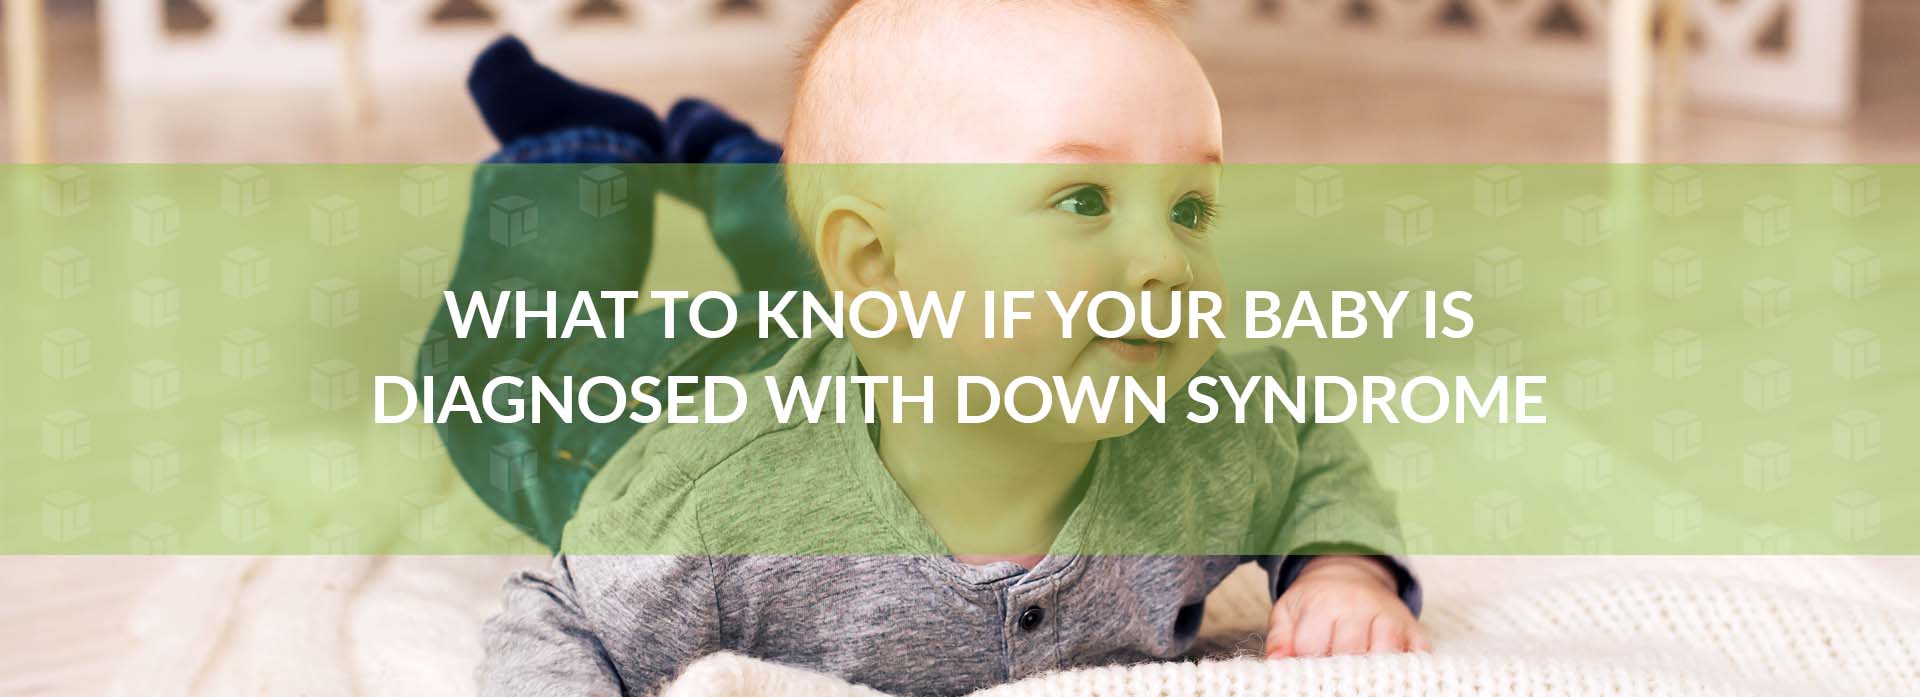 What To Know If Your Baby Is Diagnosed With Down Syndrome